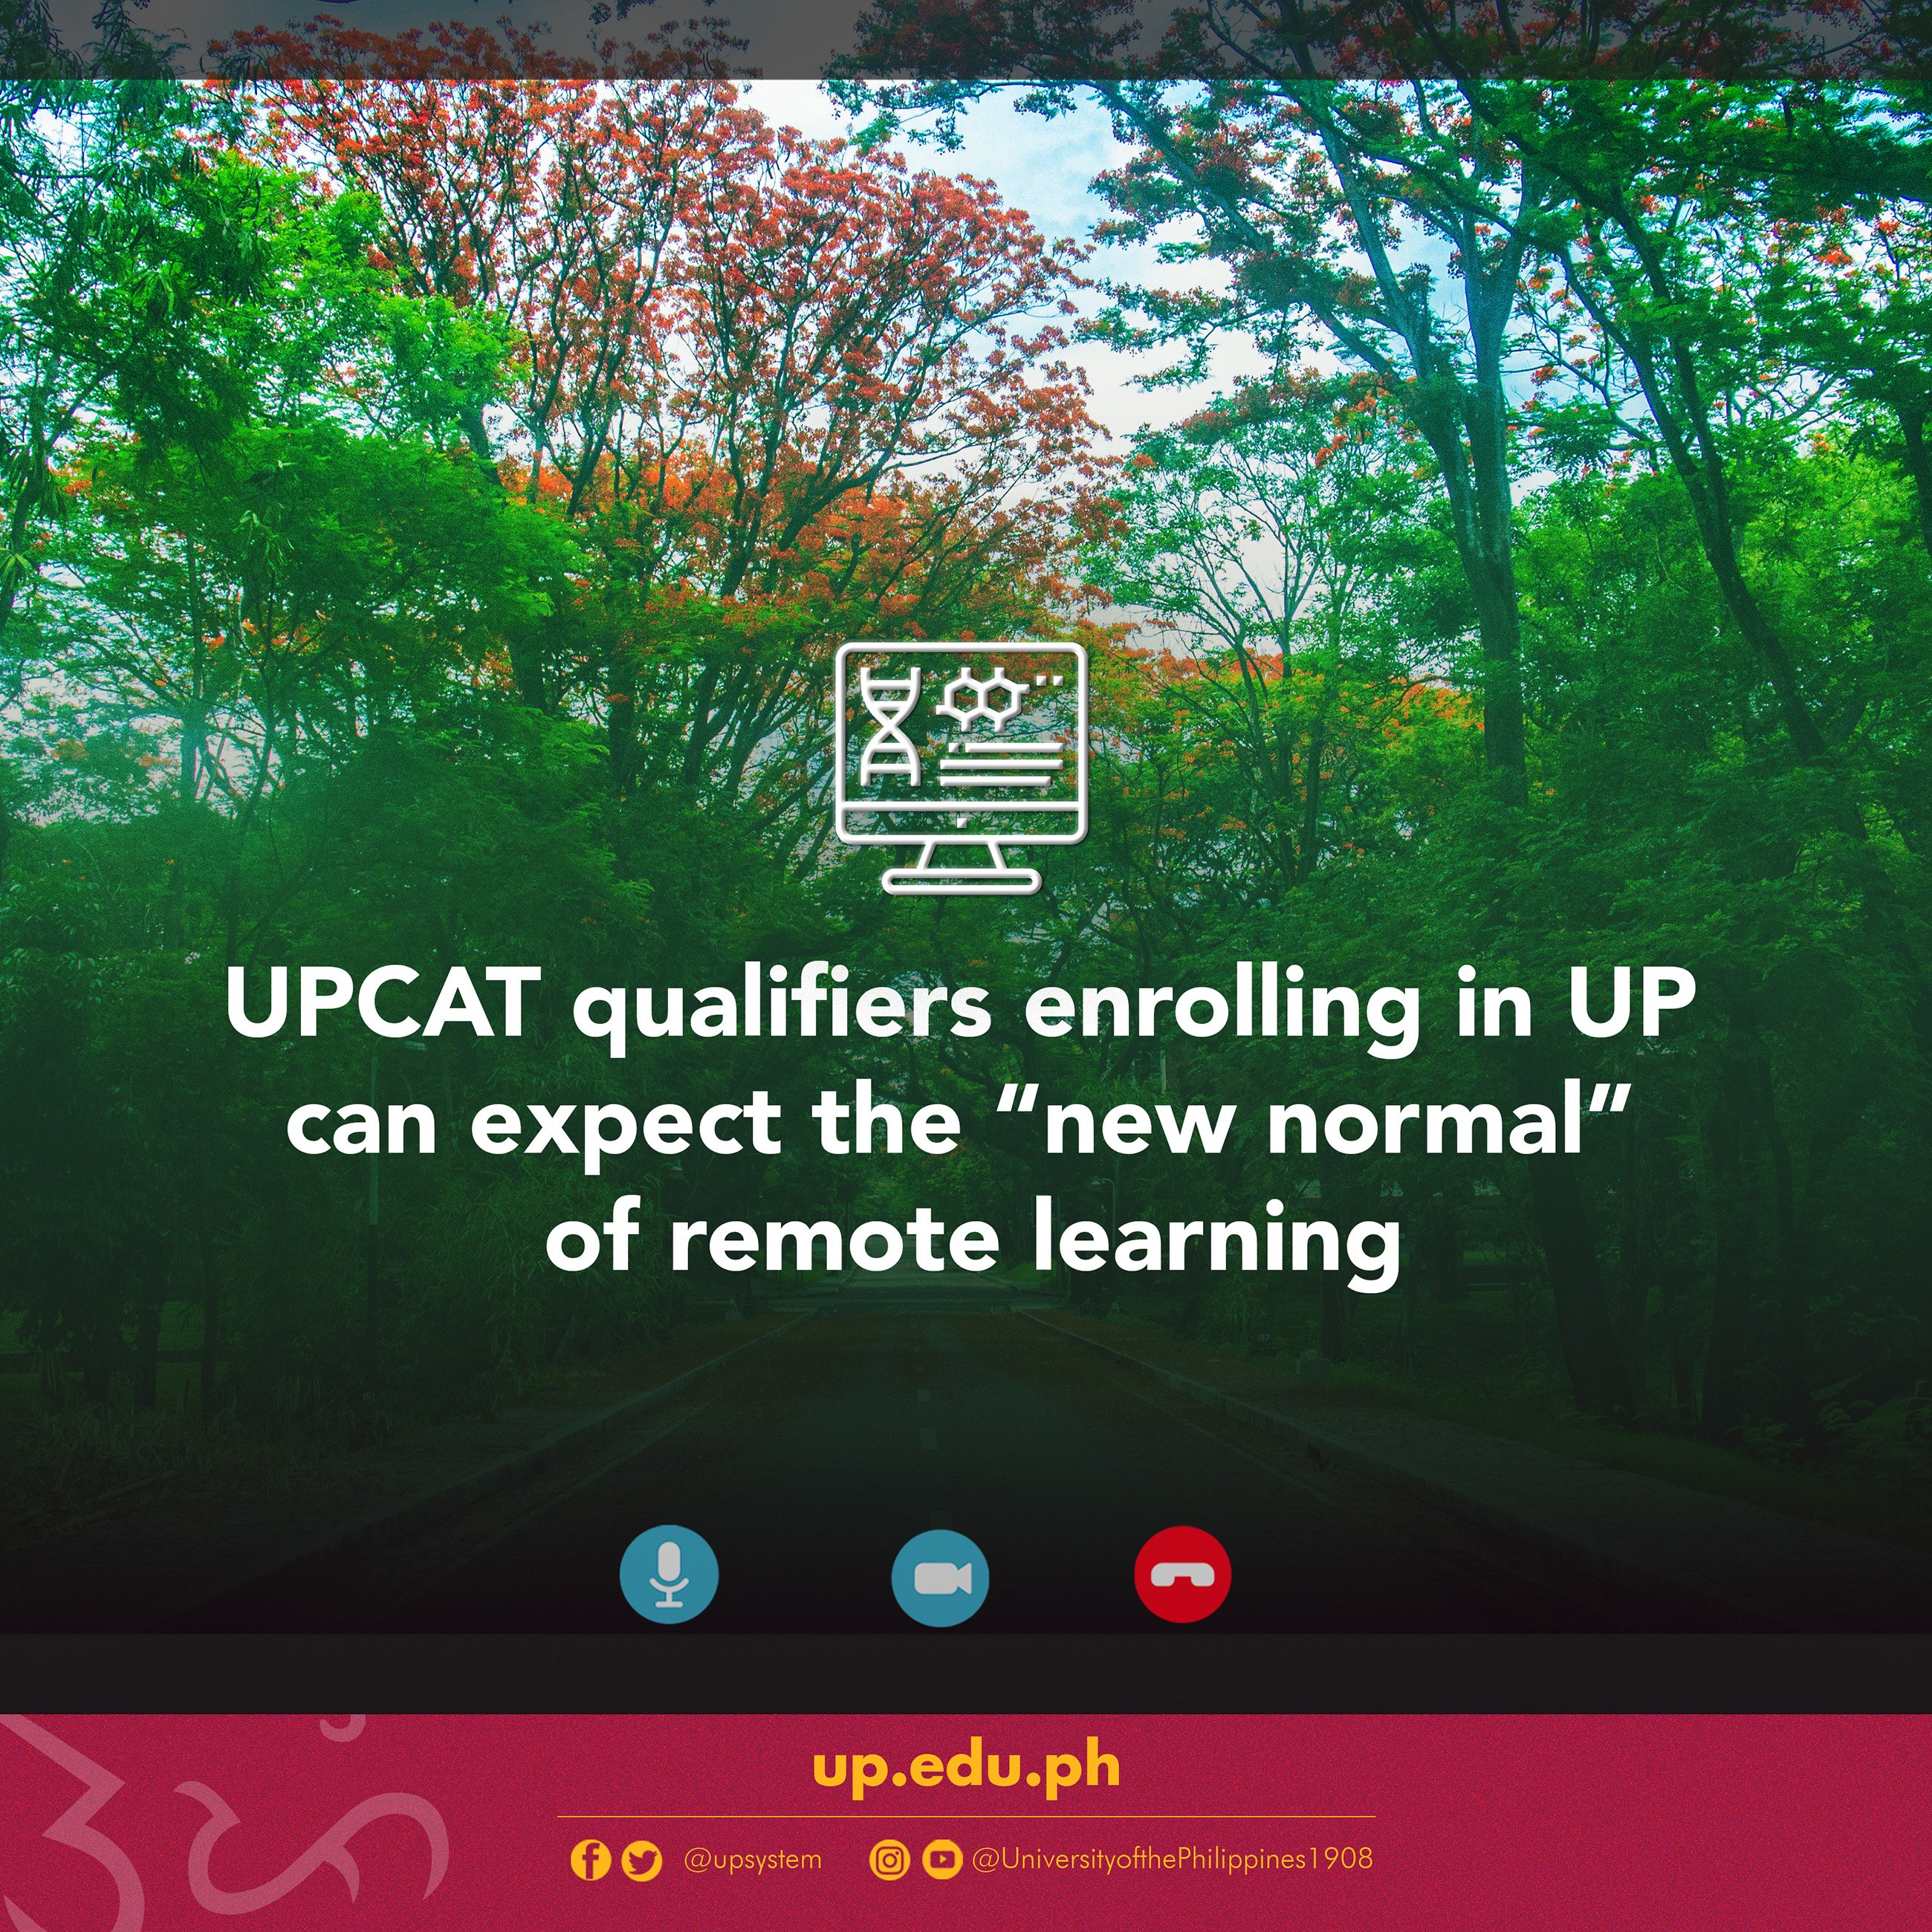 UPCAT qualifiers enrolling in UP can expect the “new normal” of remote learning